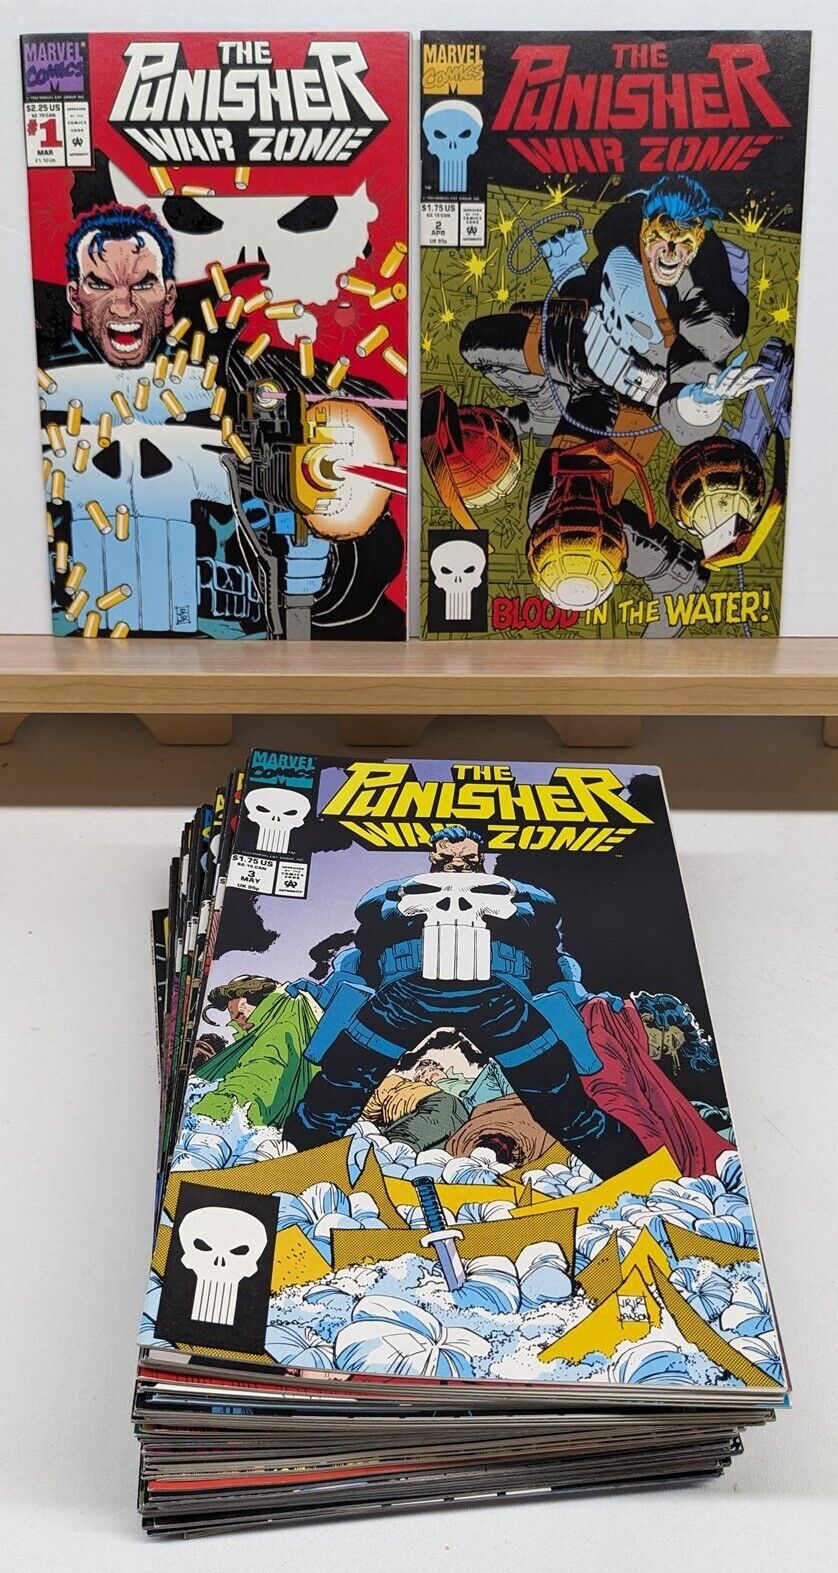 THE PUNISHER WAR ZONE #1-41 Complete Marvel 1992 Series w/Annuals 1 & 2 - VF/NM